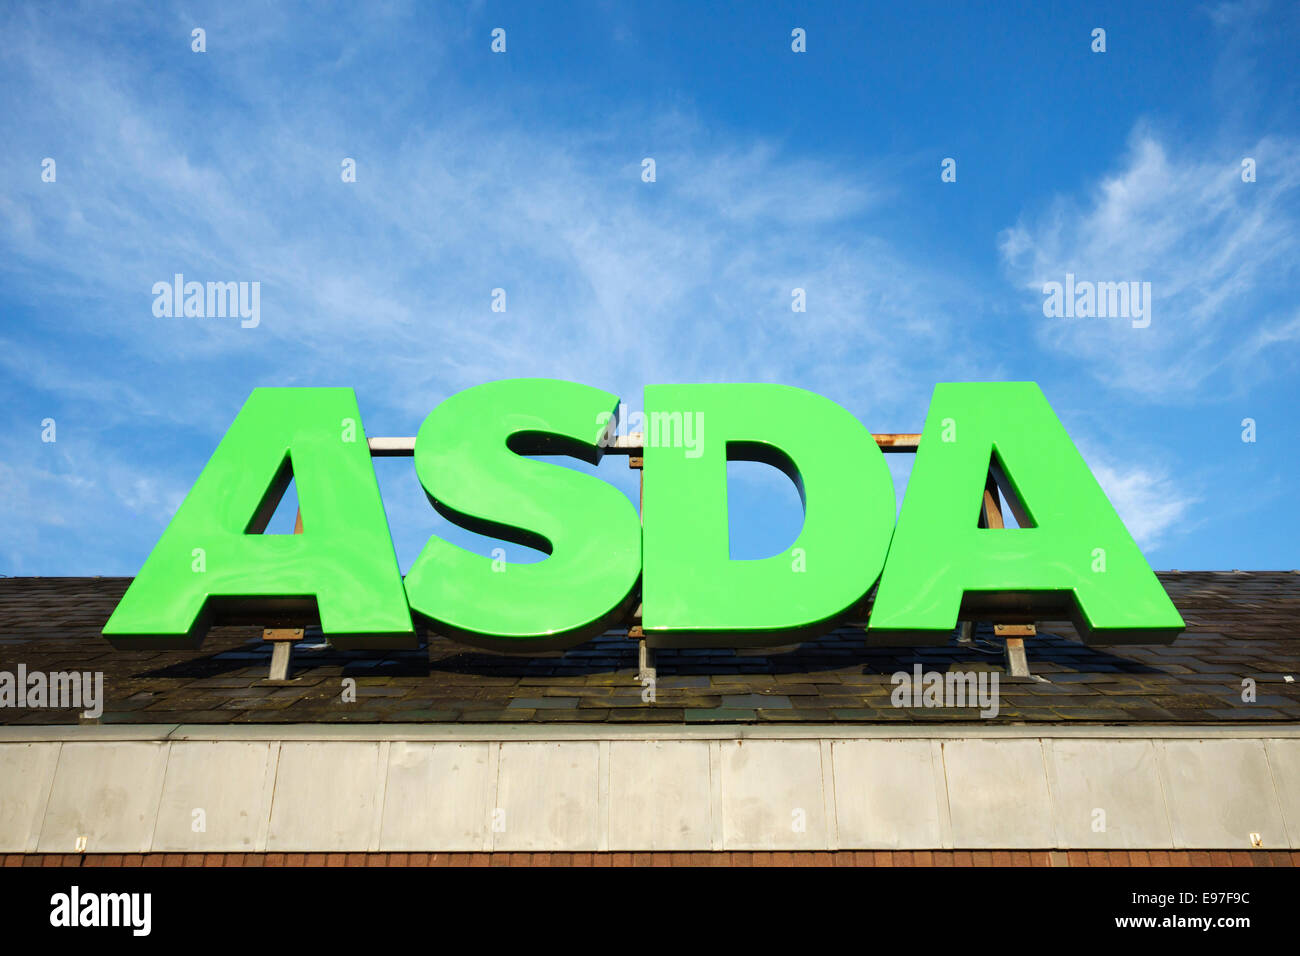 The Asda sign above a supermarket, against a blue sky, UK Stock Photo